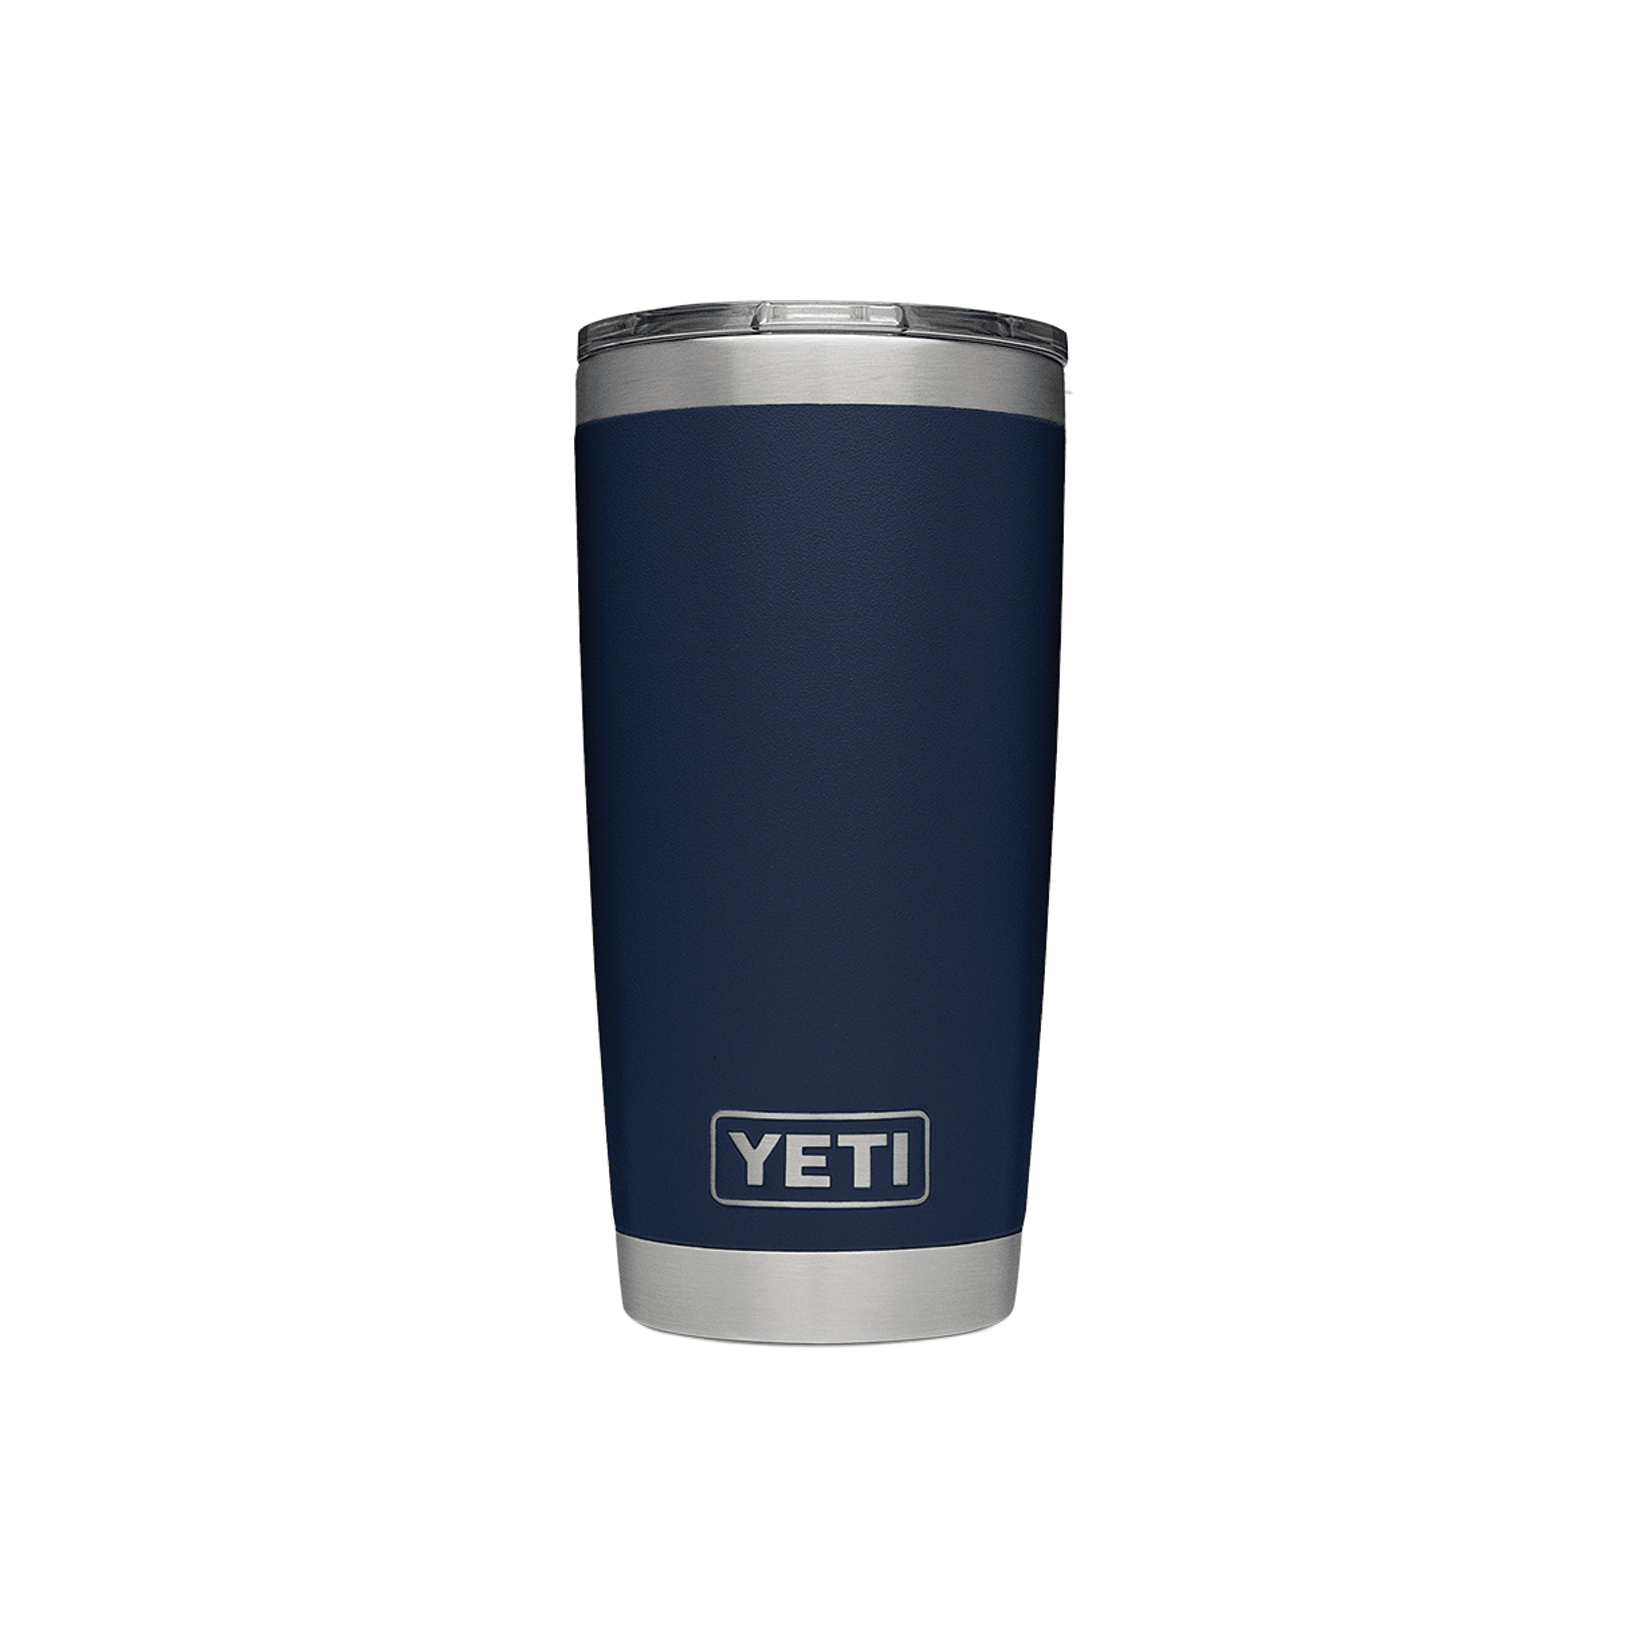 https://image.fisheriessupply.com/c_lpad,dpr_3.0,w_550,h_550,d_imageComingSoon-tiff/f_auto,q_auto/v1/static-images/yeti-coolers-rambler-20-oz-stainless-steel-insulated-tumbler-5-duracoat-colors-navy